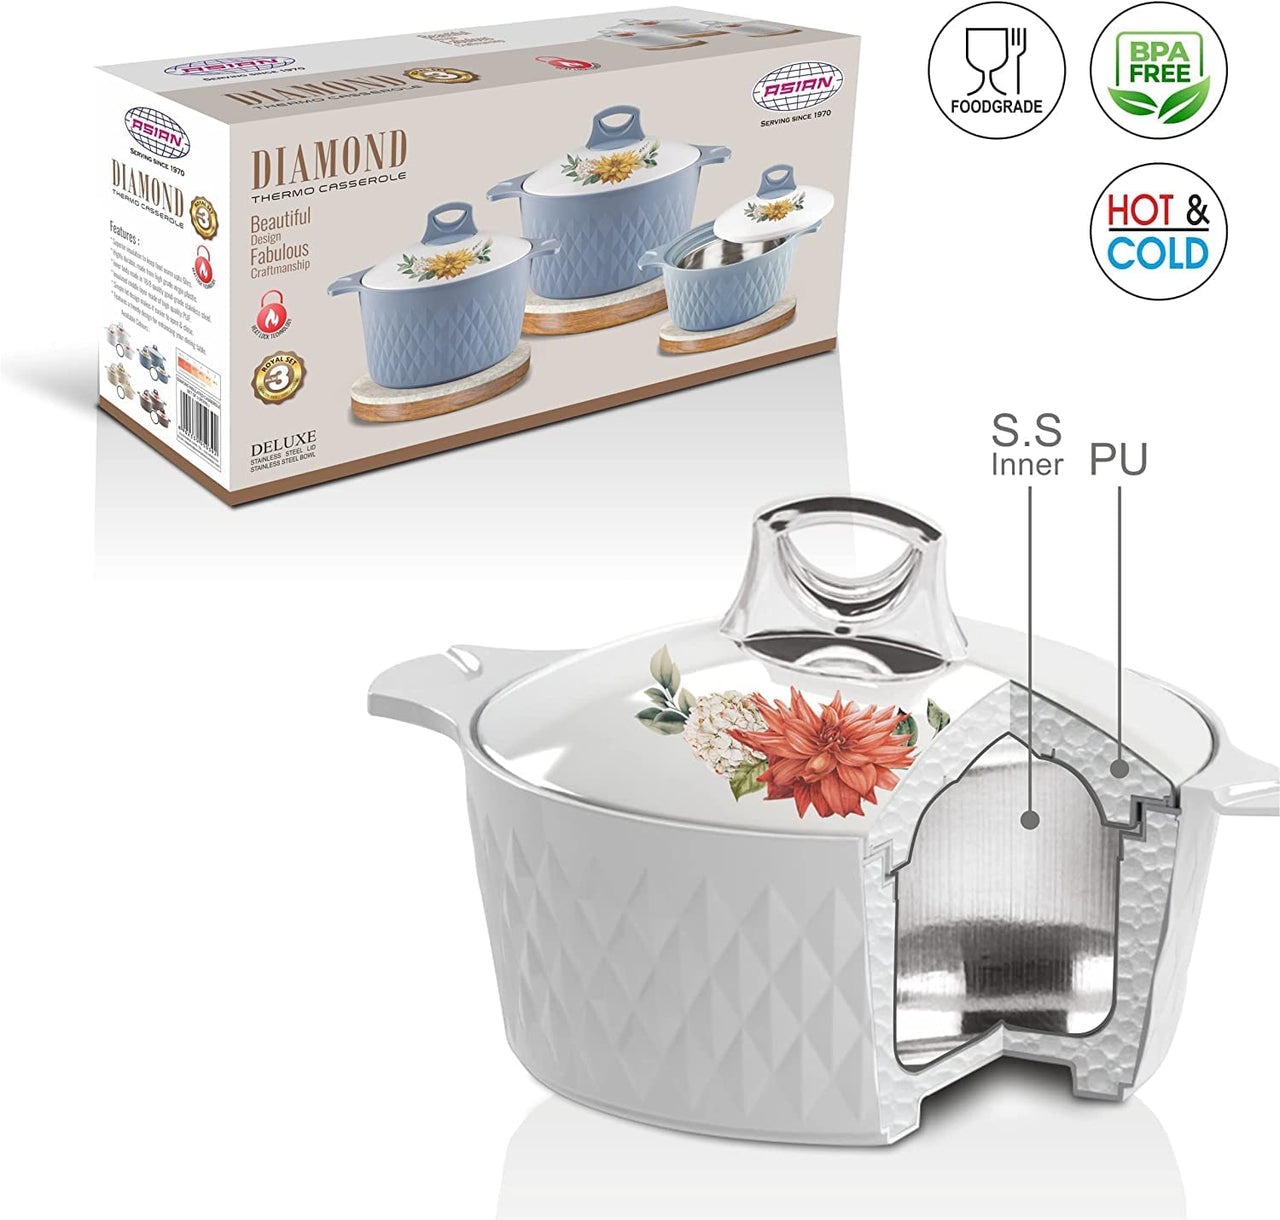 Tmvel Casserole Hotpot, Stainless Steel insulated Hot Pot, Food Warmer, Keeps Food Warm for Hours Set (2500ml, 3500ml, 5000ml)